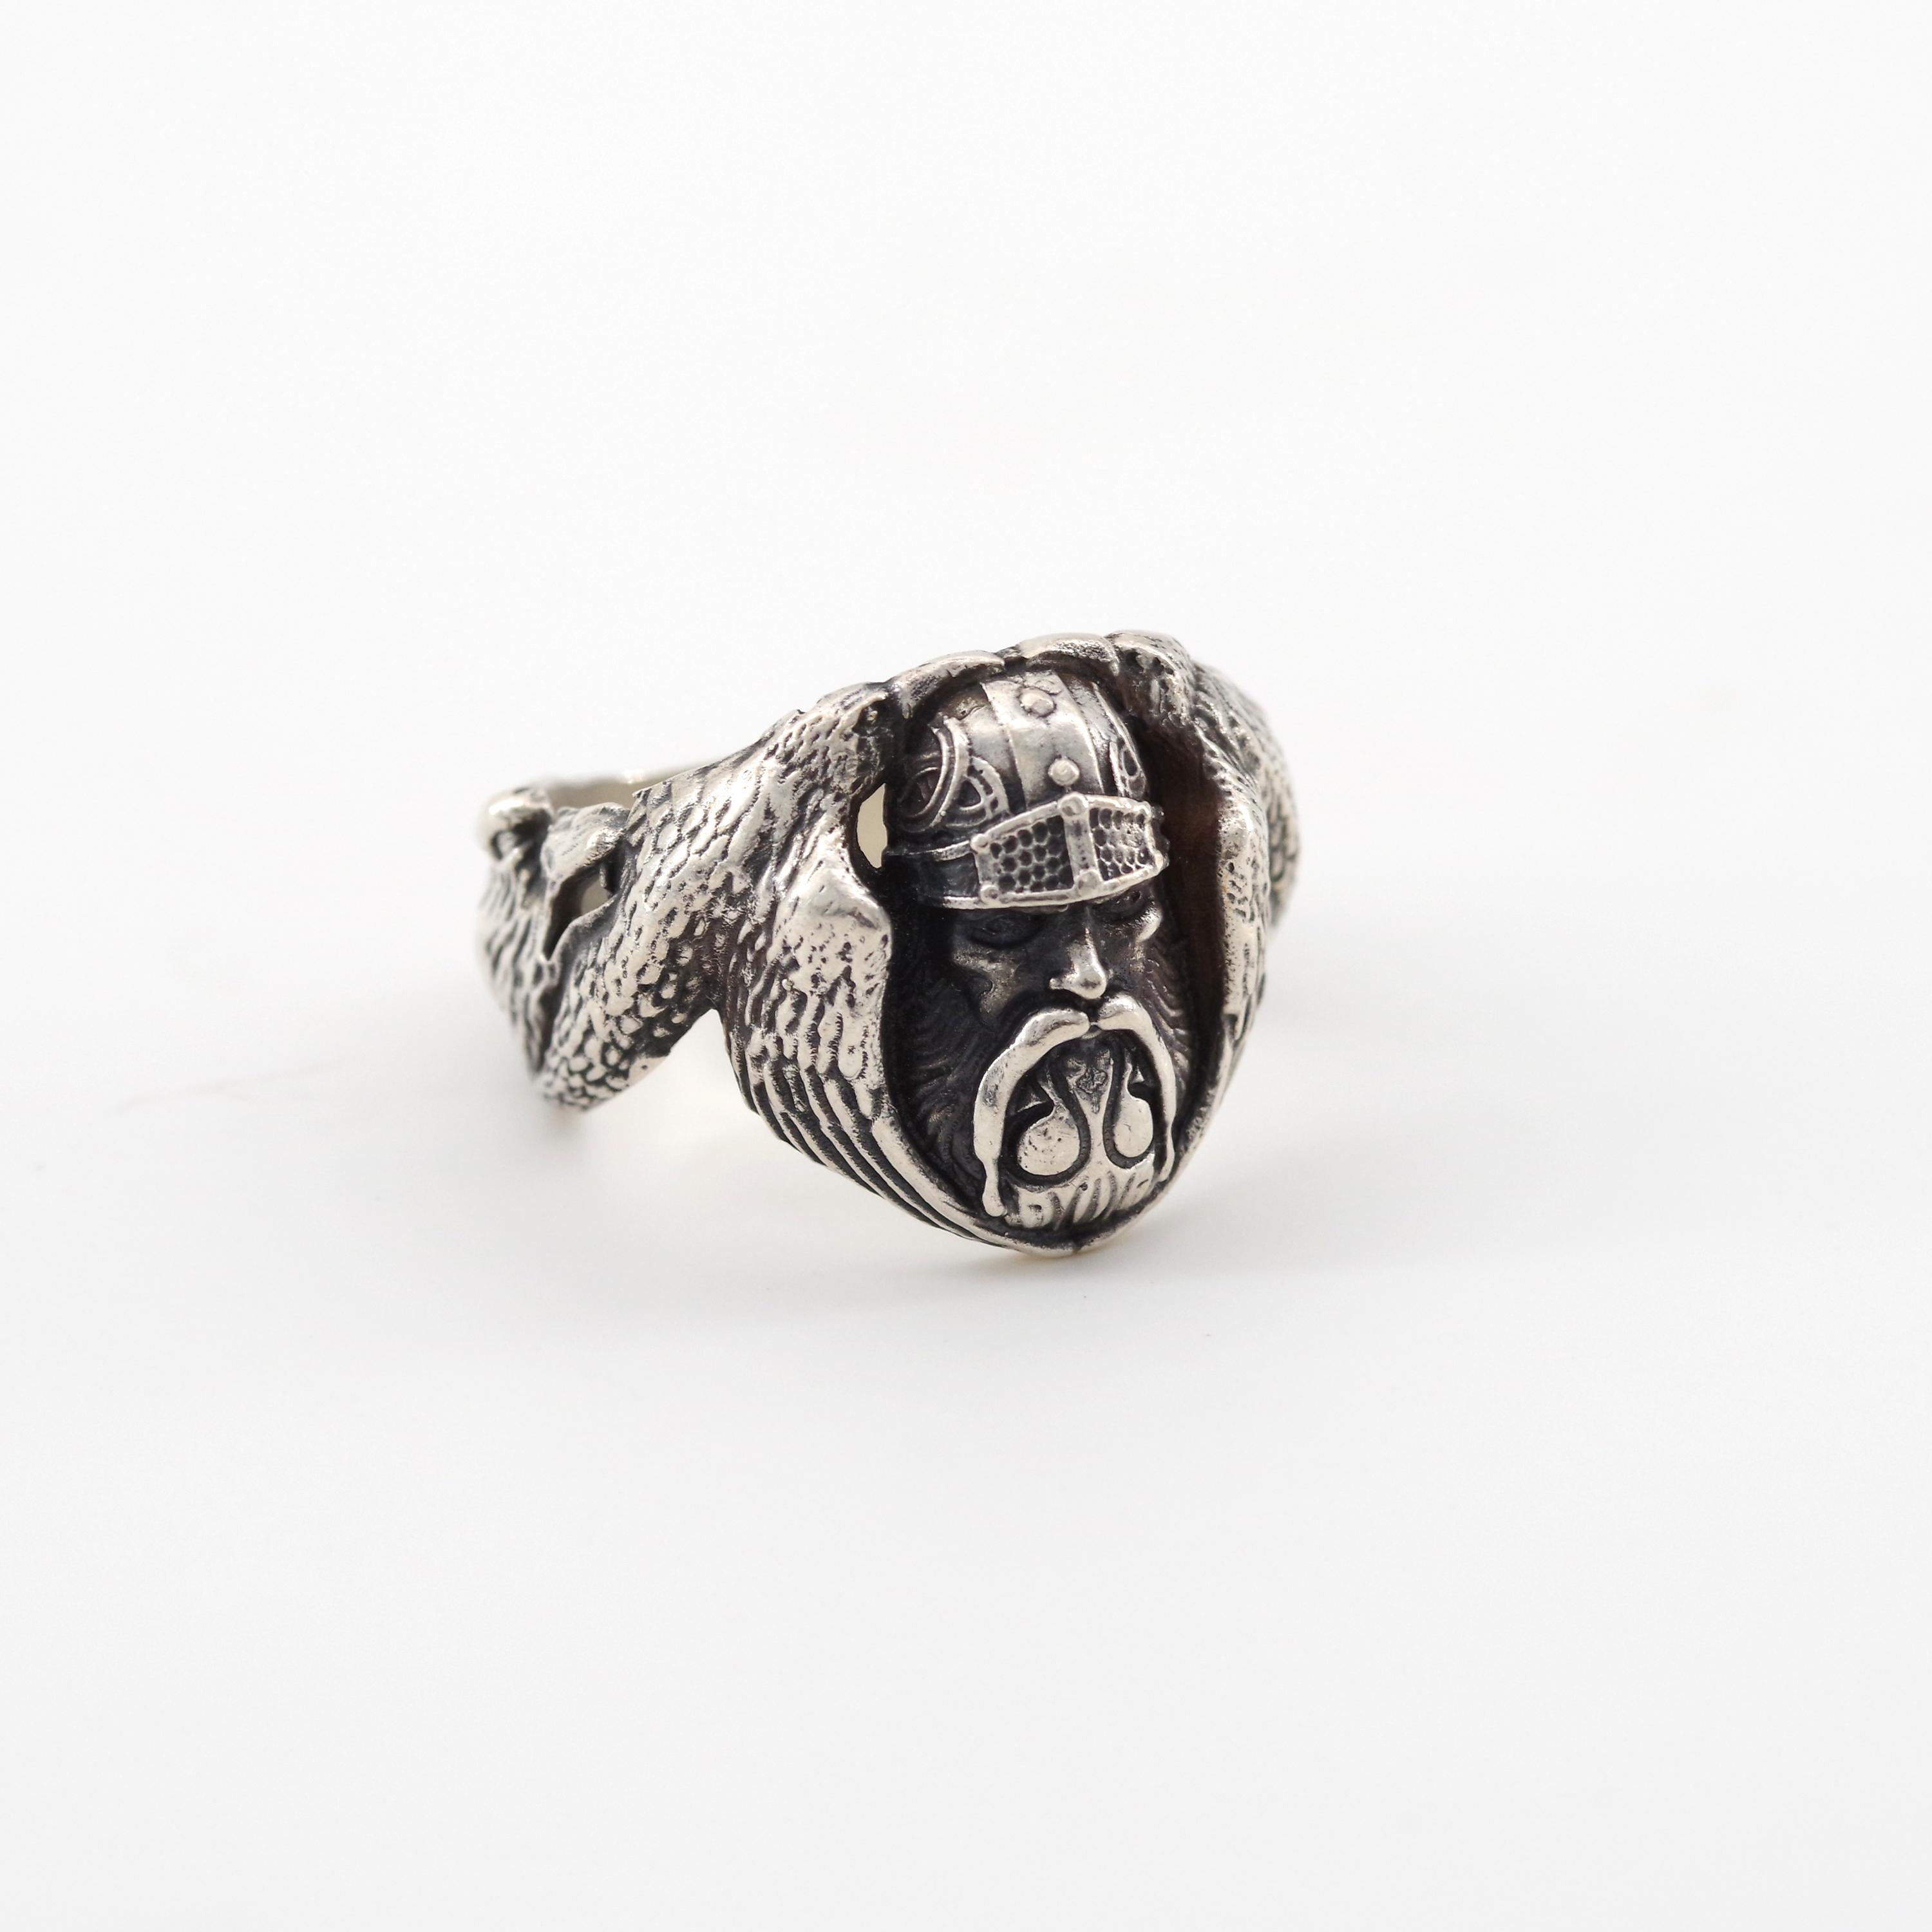 What, you have one of these already? No, I'm afraid you're mistaken. Perhaps your figural ring depicts Mímir. This is Odin, the Norse God associated with wisdom, royalty, wisdom, good health and knowledge (among other things). Odin is a war god but